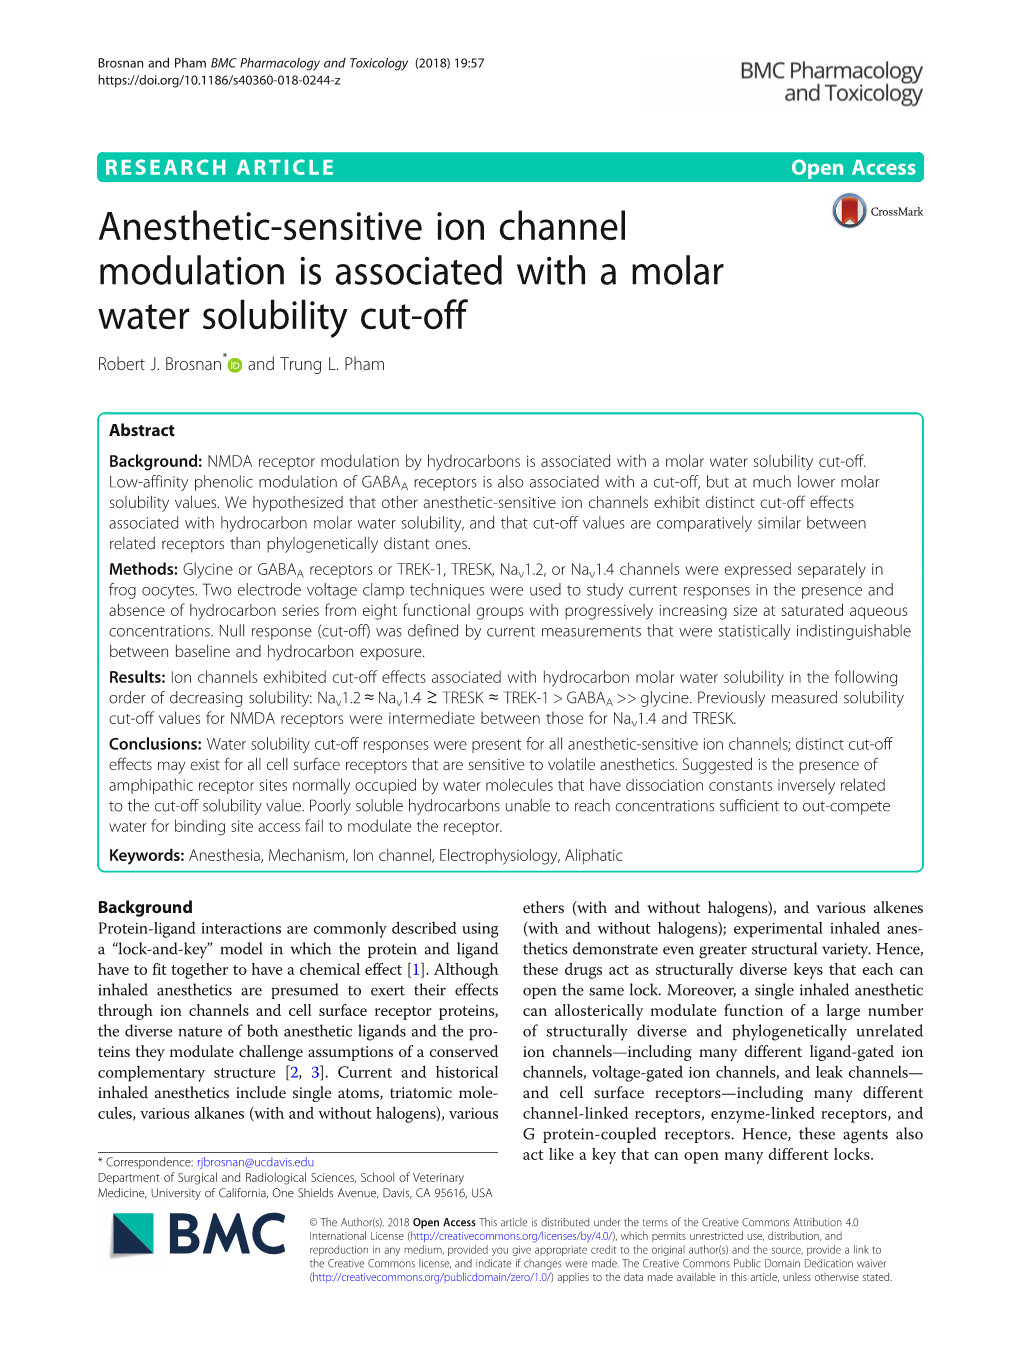 Anesthetic-Sensitive Ion Channel Modulation Is Associated with a Molar Water Solubility Cut-Off Robert J